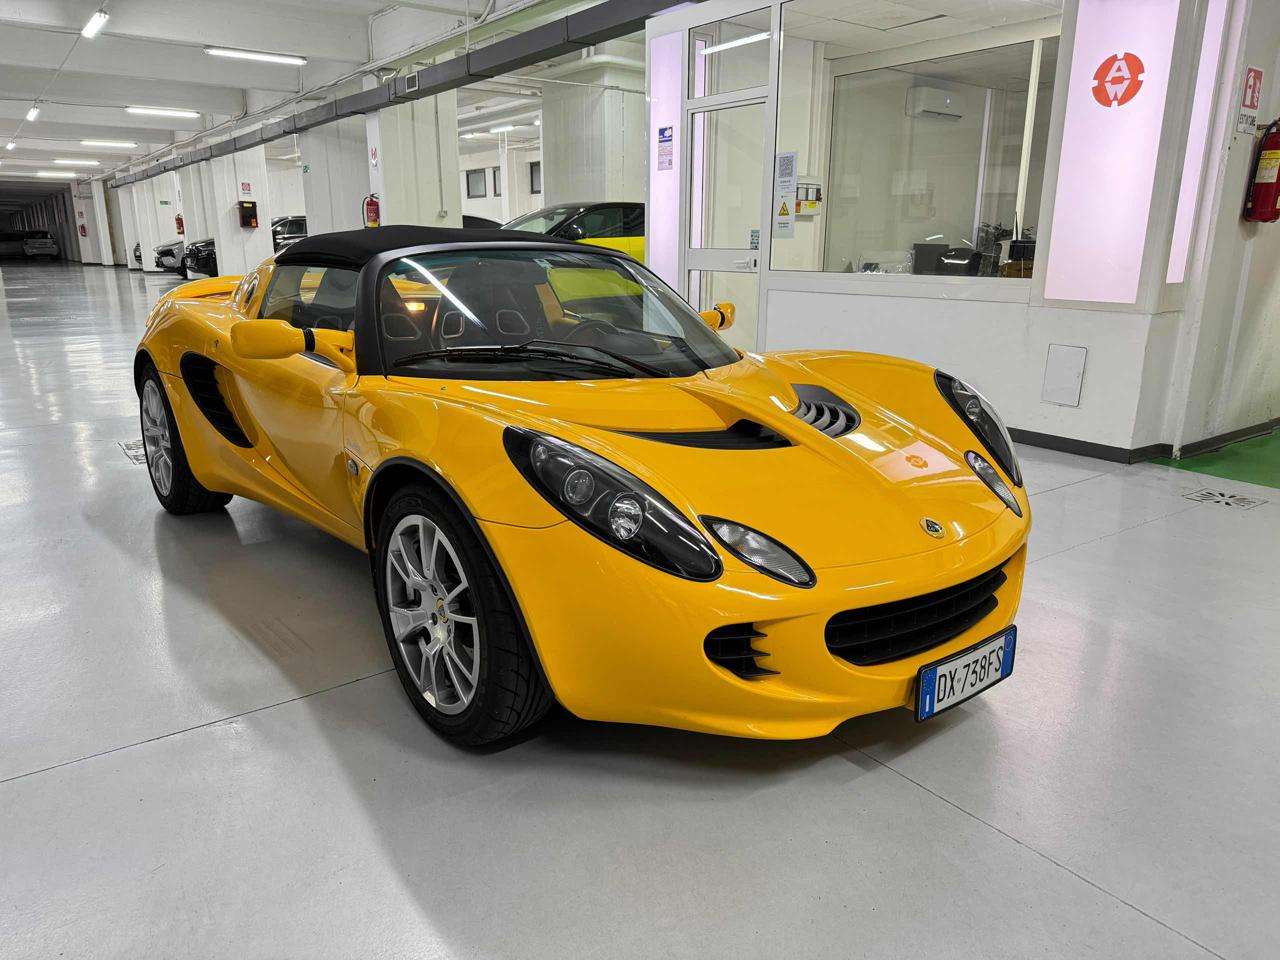 Lotus Elise Convertible in Yellow used in Roma - Rm for € 49,800.-